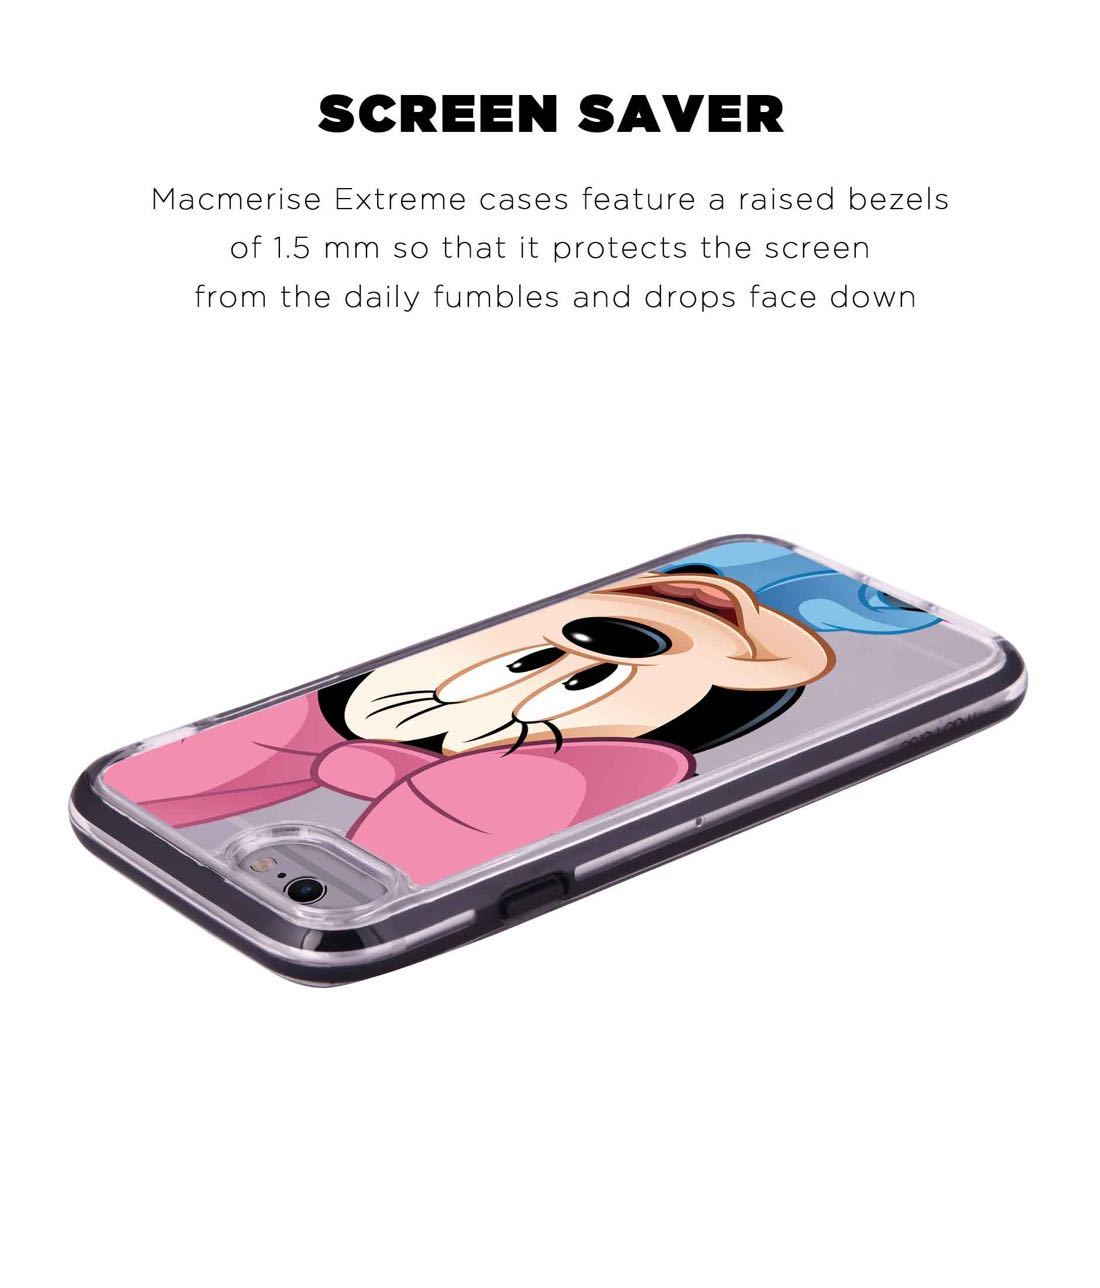 Zoom Up Minnie - Extreme Phone Case for iPhone 6 Plus